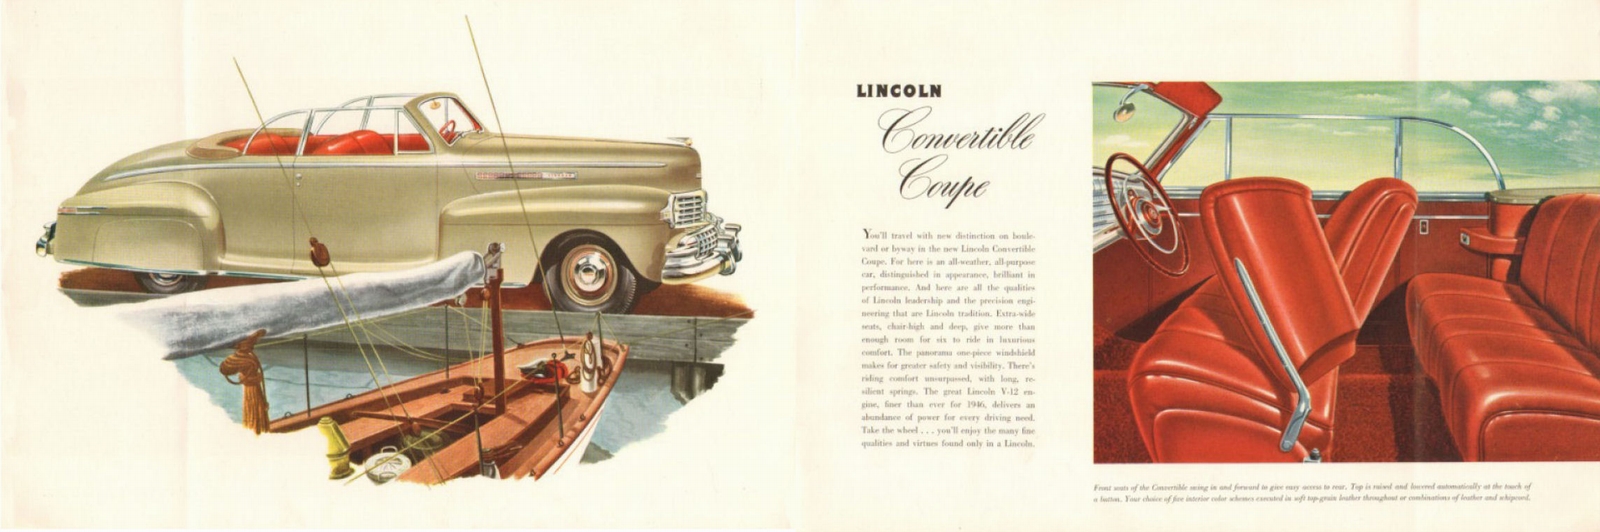 n_1946 Lincoln and Continental-06-07.jpg